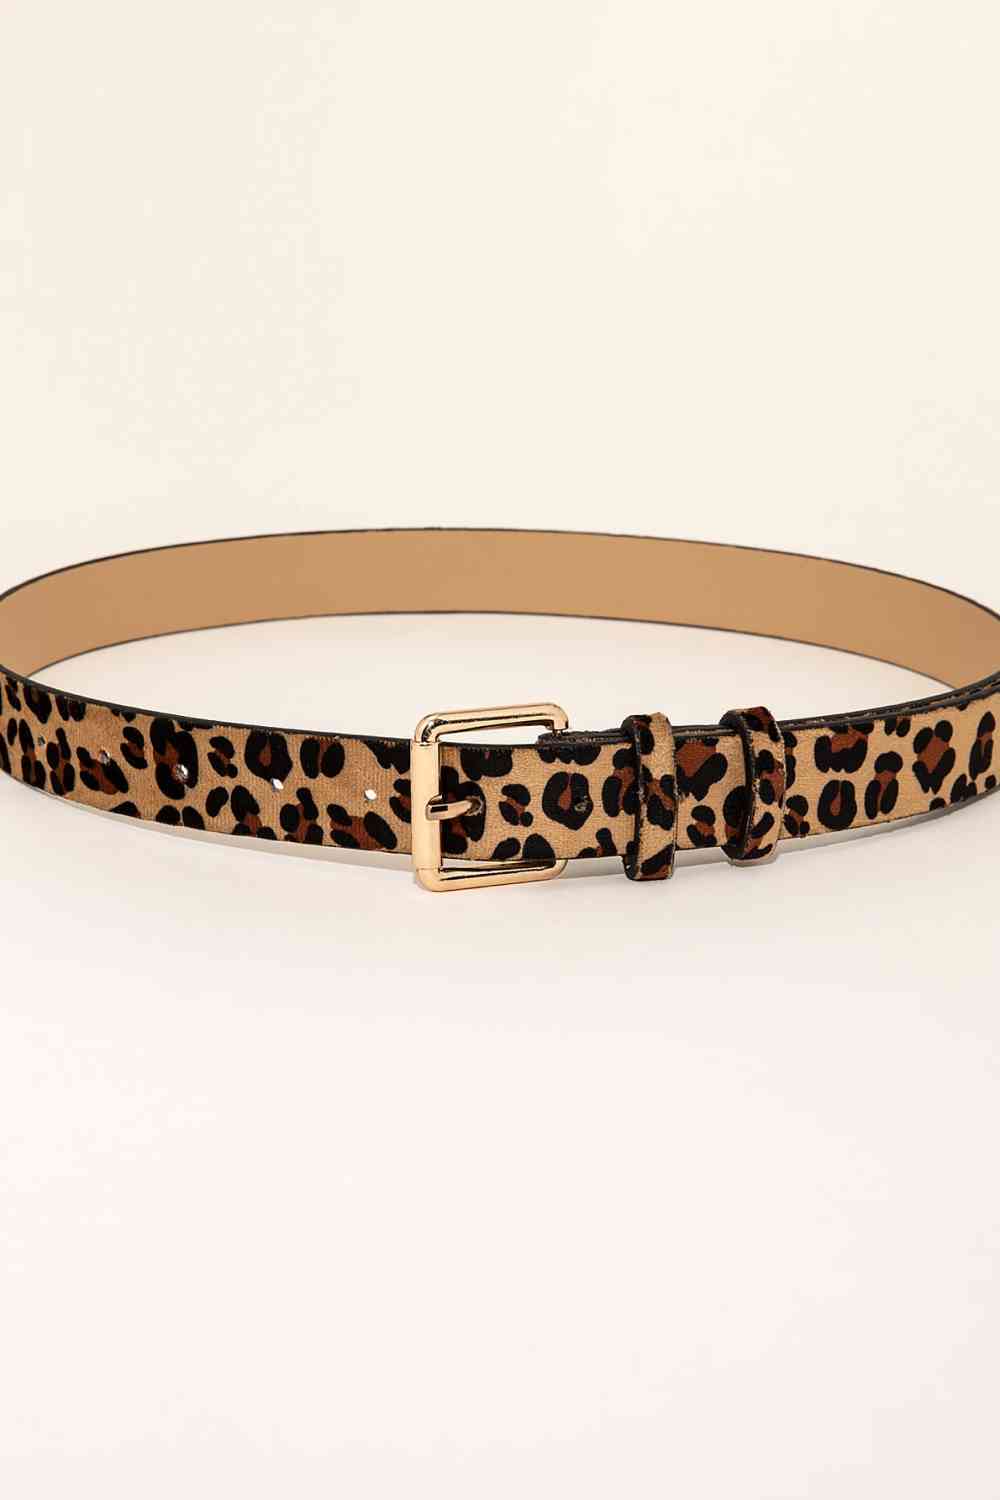 Leopard PU Leather Belt Print on any thing USA/STOD clothes